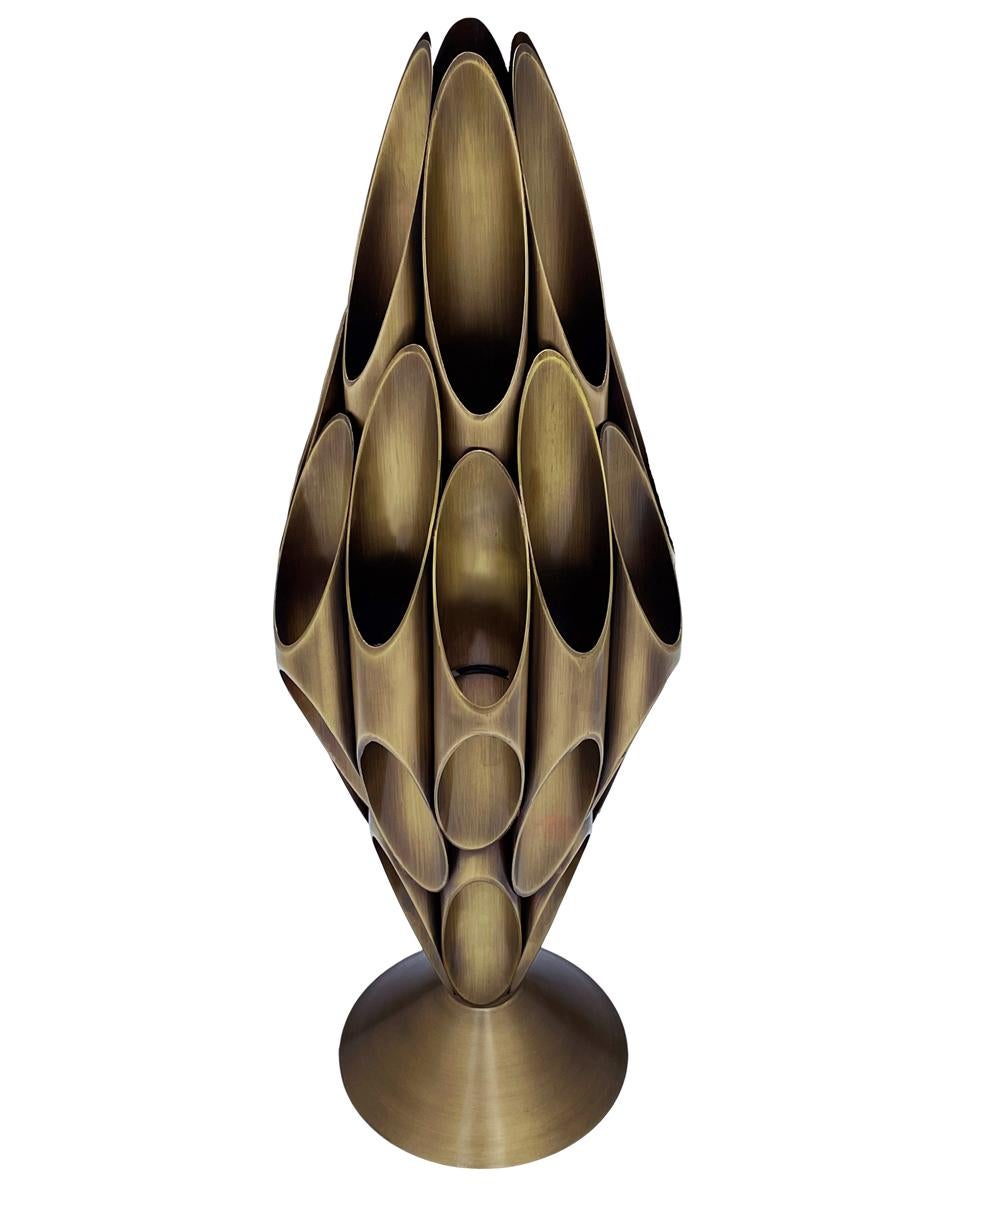 Contemporary Hollywood Regency Tubular Table Sculpture Brass Accent Lamp after Mastercraft